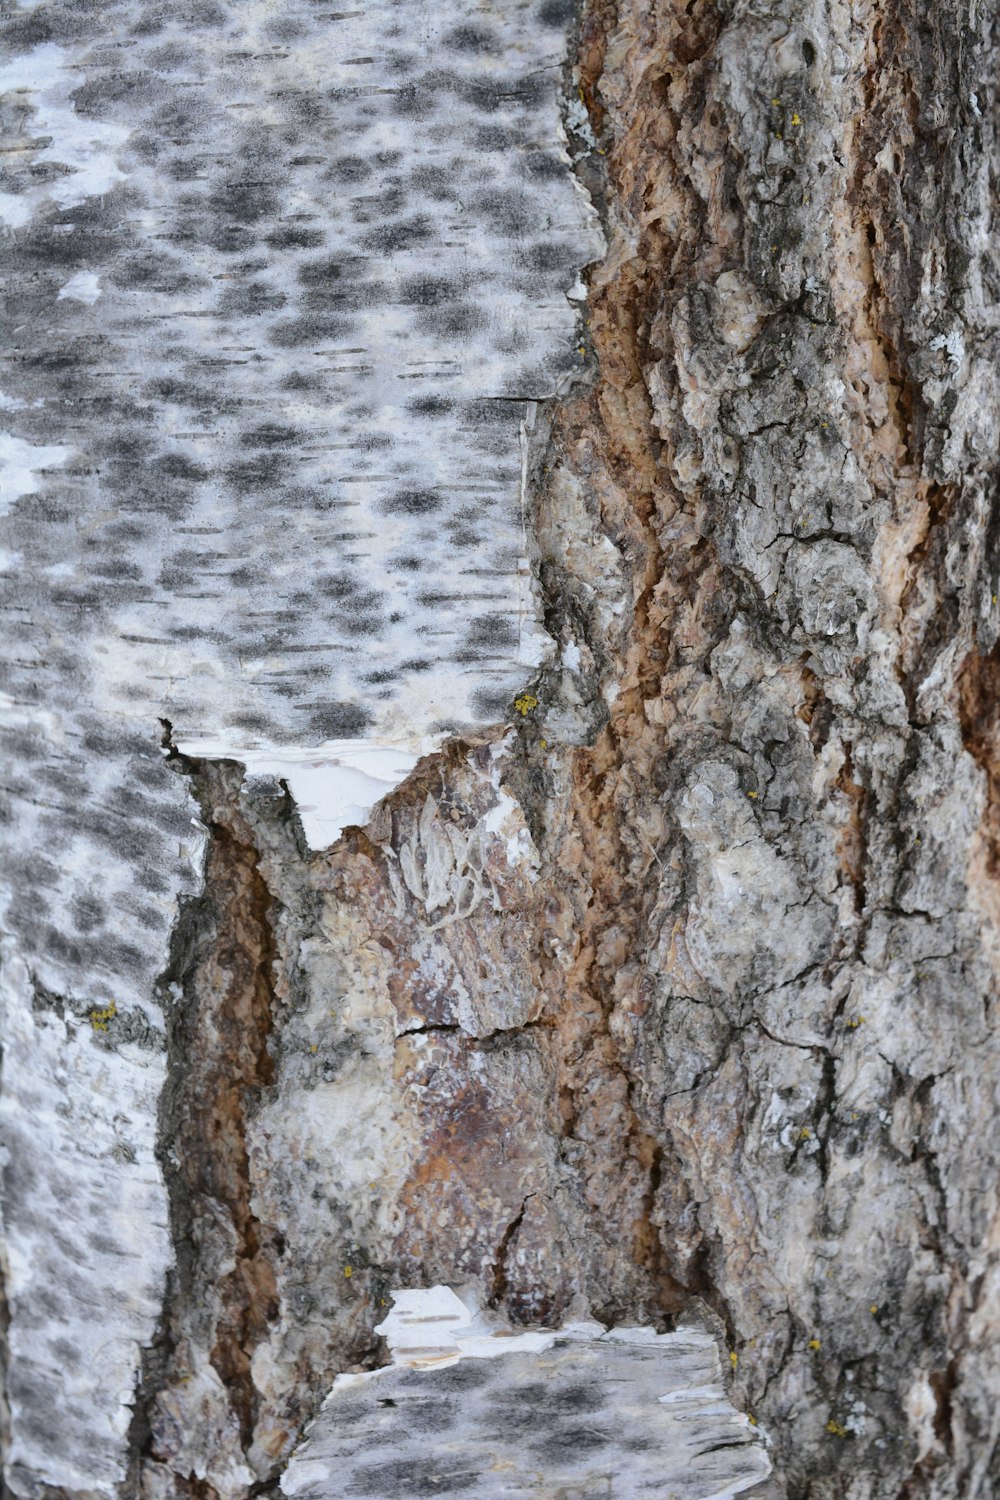 a close up of a tree trunk with a bird perched on it